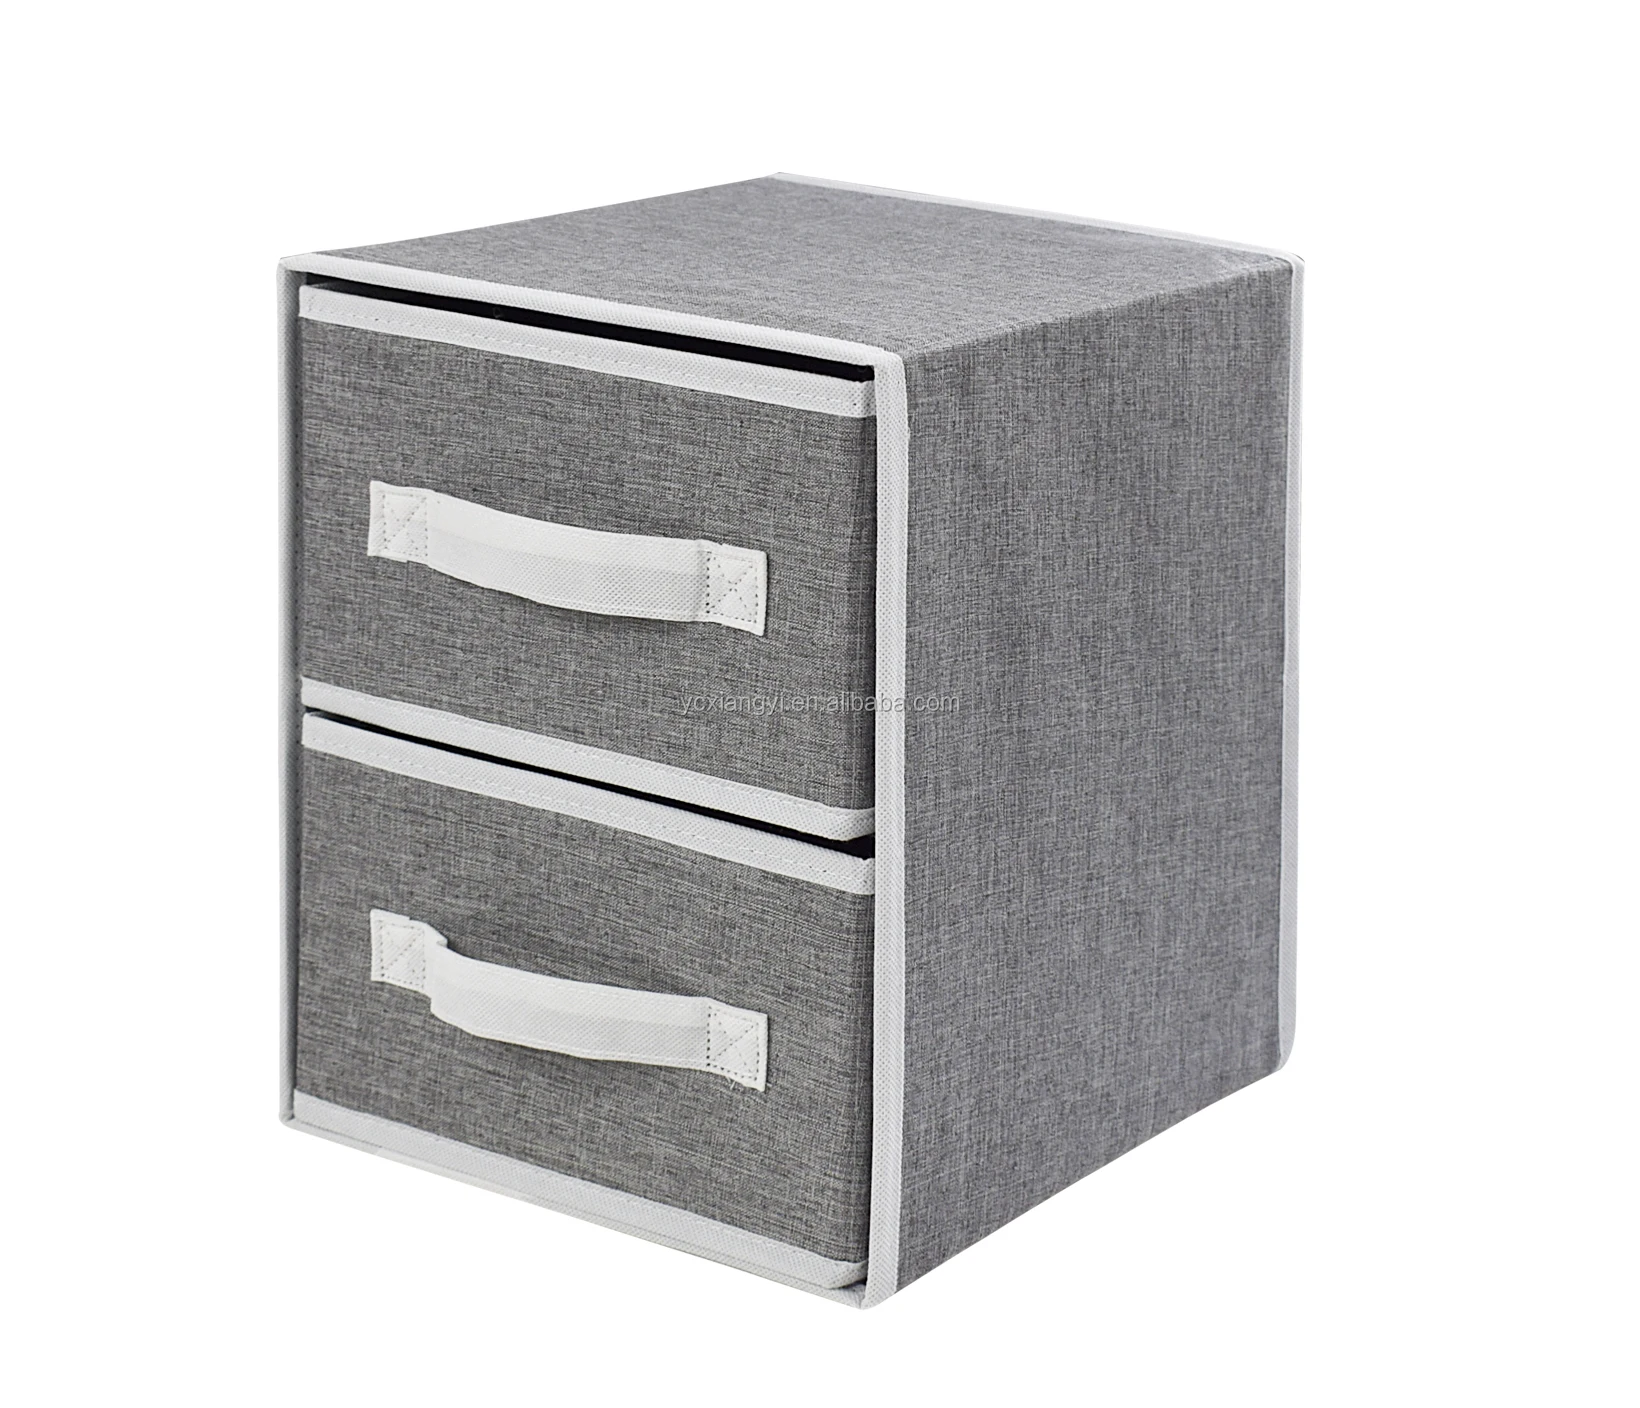 Fabric Storage Boxes Online, 55% OFF | www.emanagreen.com